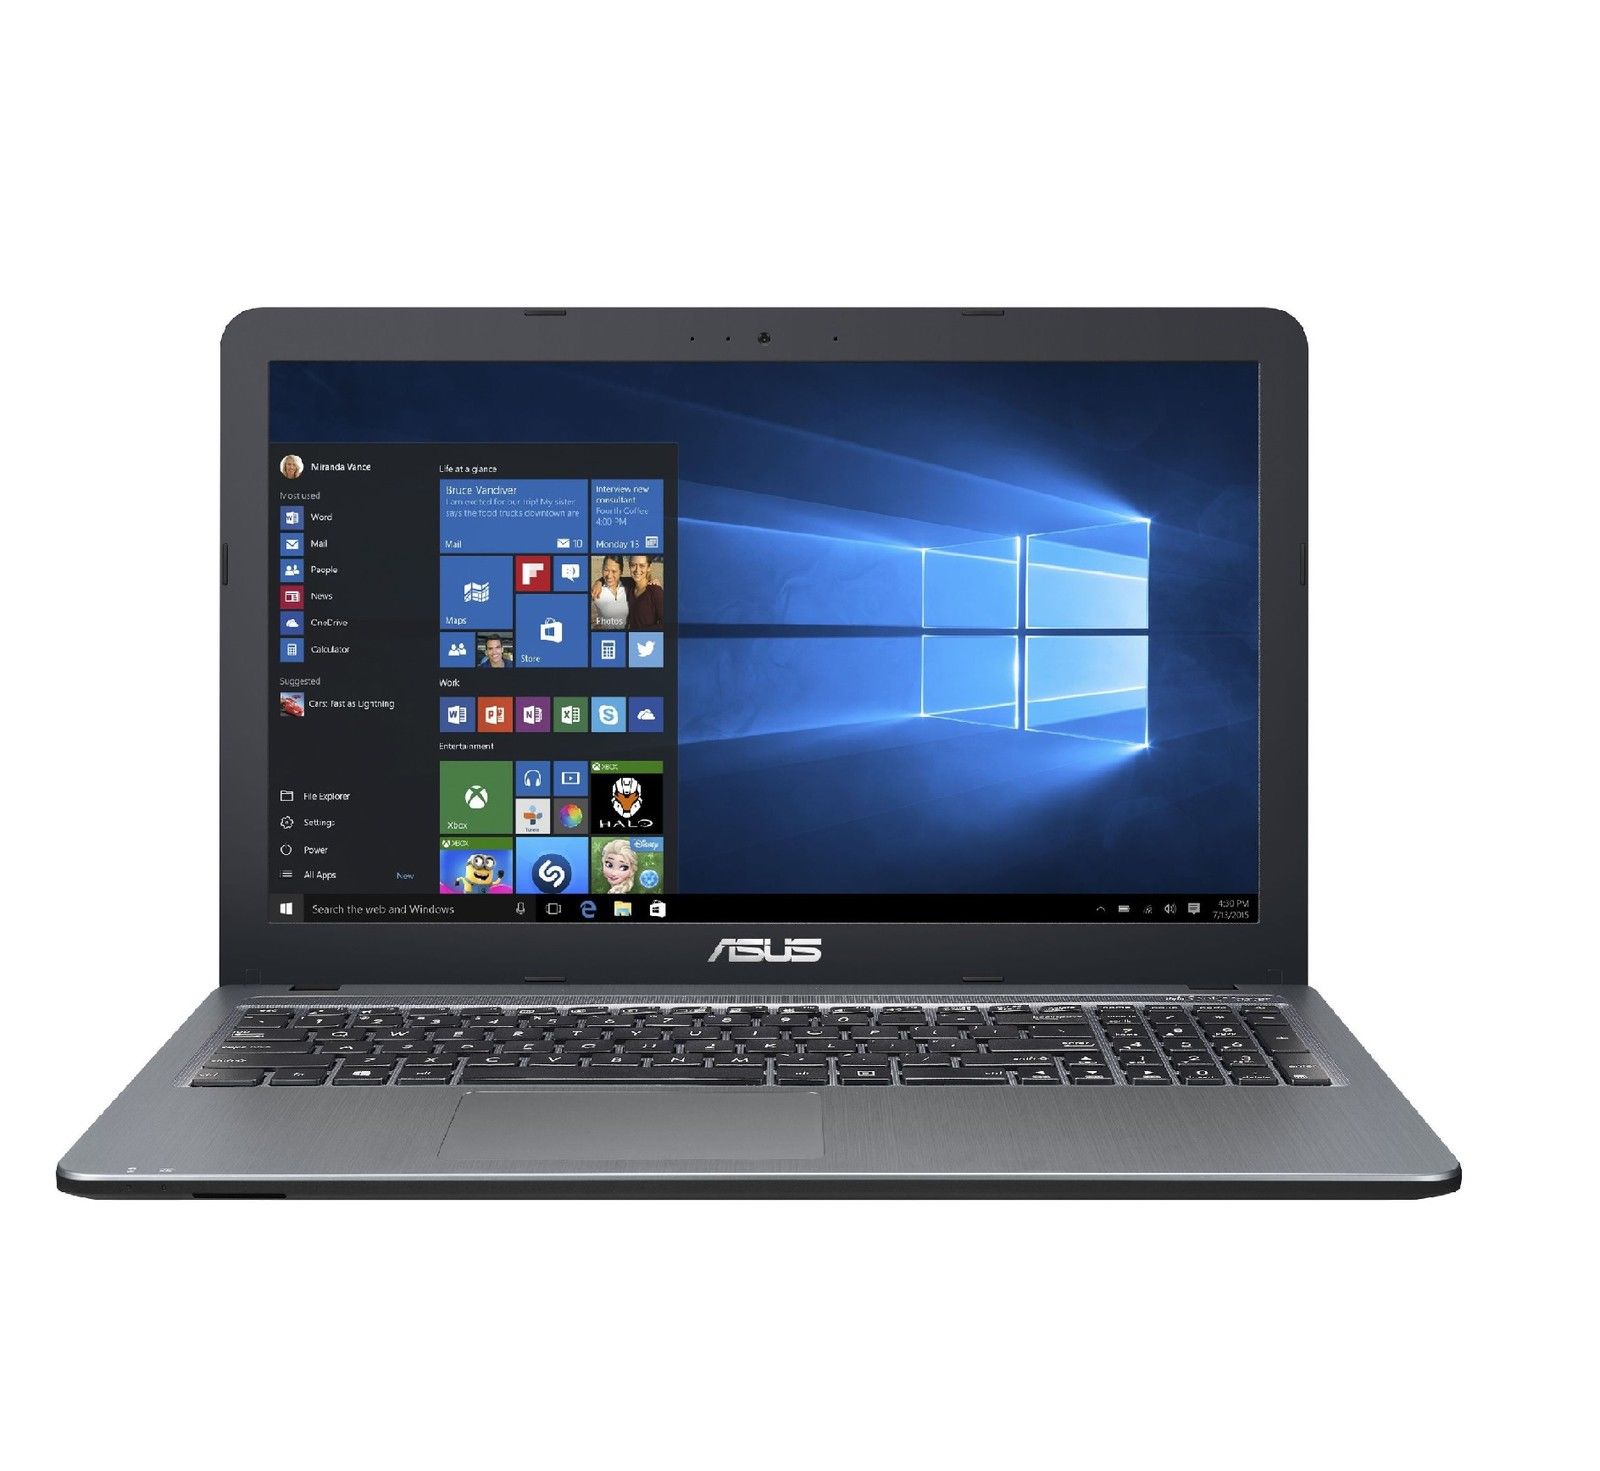 Asus Notebook 15,6 Zoll - Intel Quad Core 2,60 GHz - 500 GB - USB 3.1 - Win 10